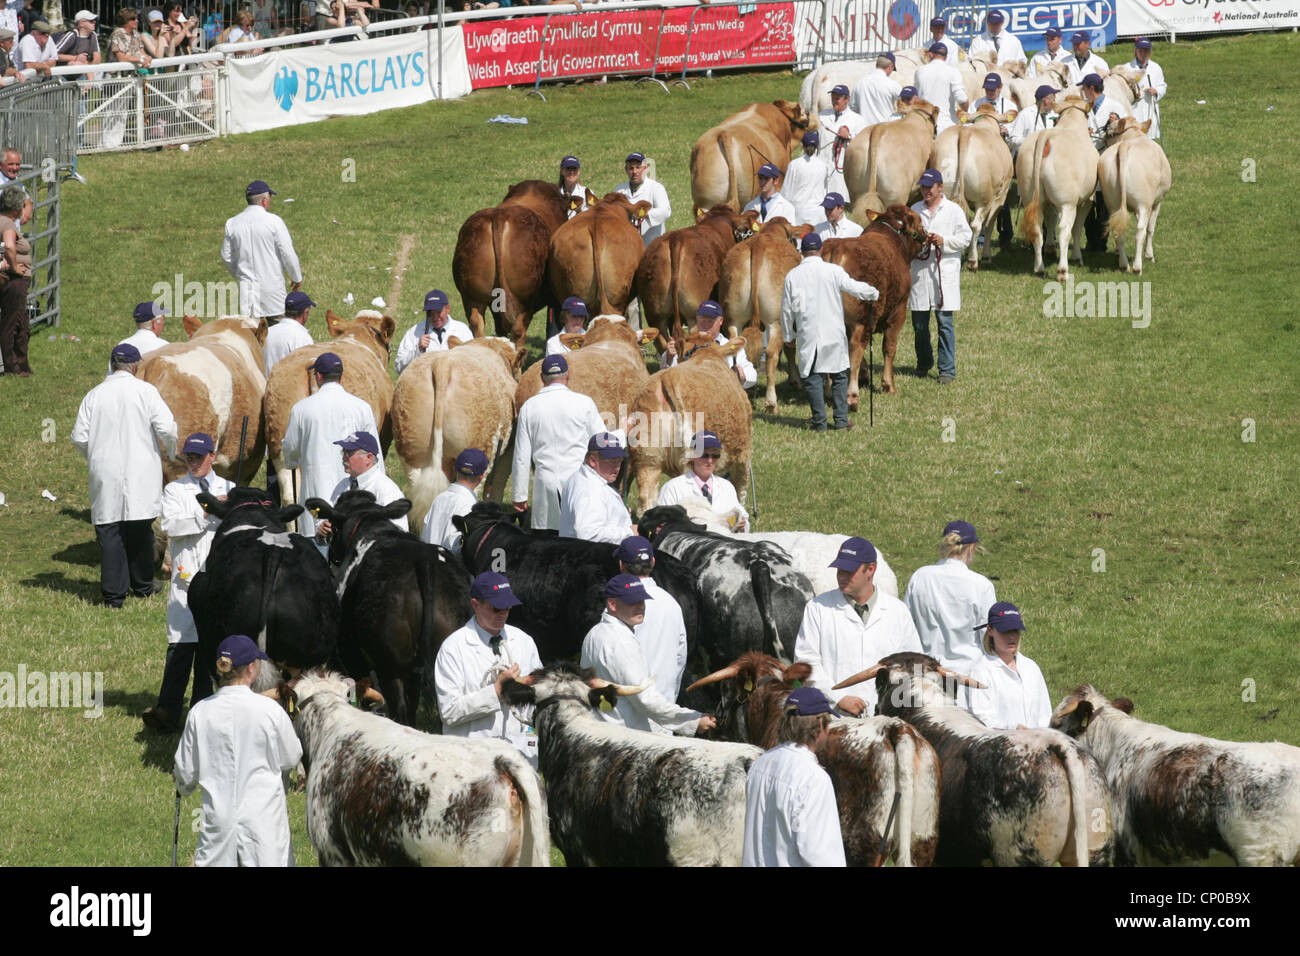 Cattle being shown at the Royal Welsh Show Stock Photo